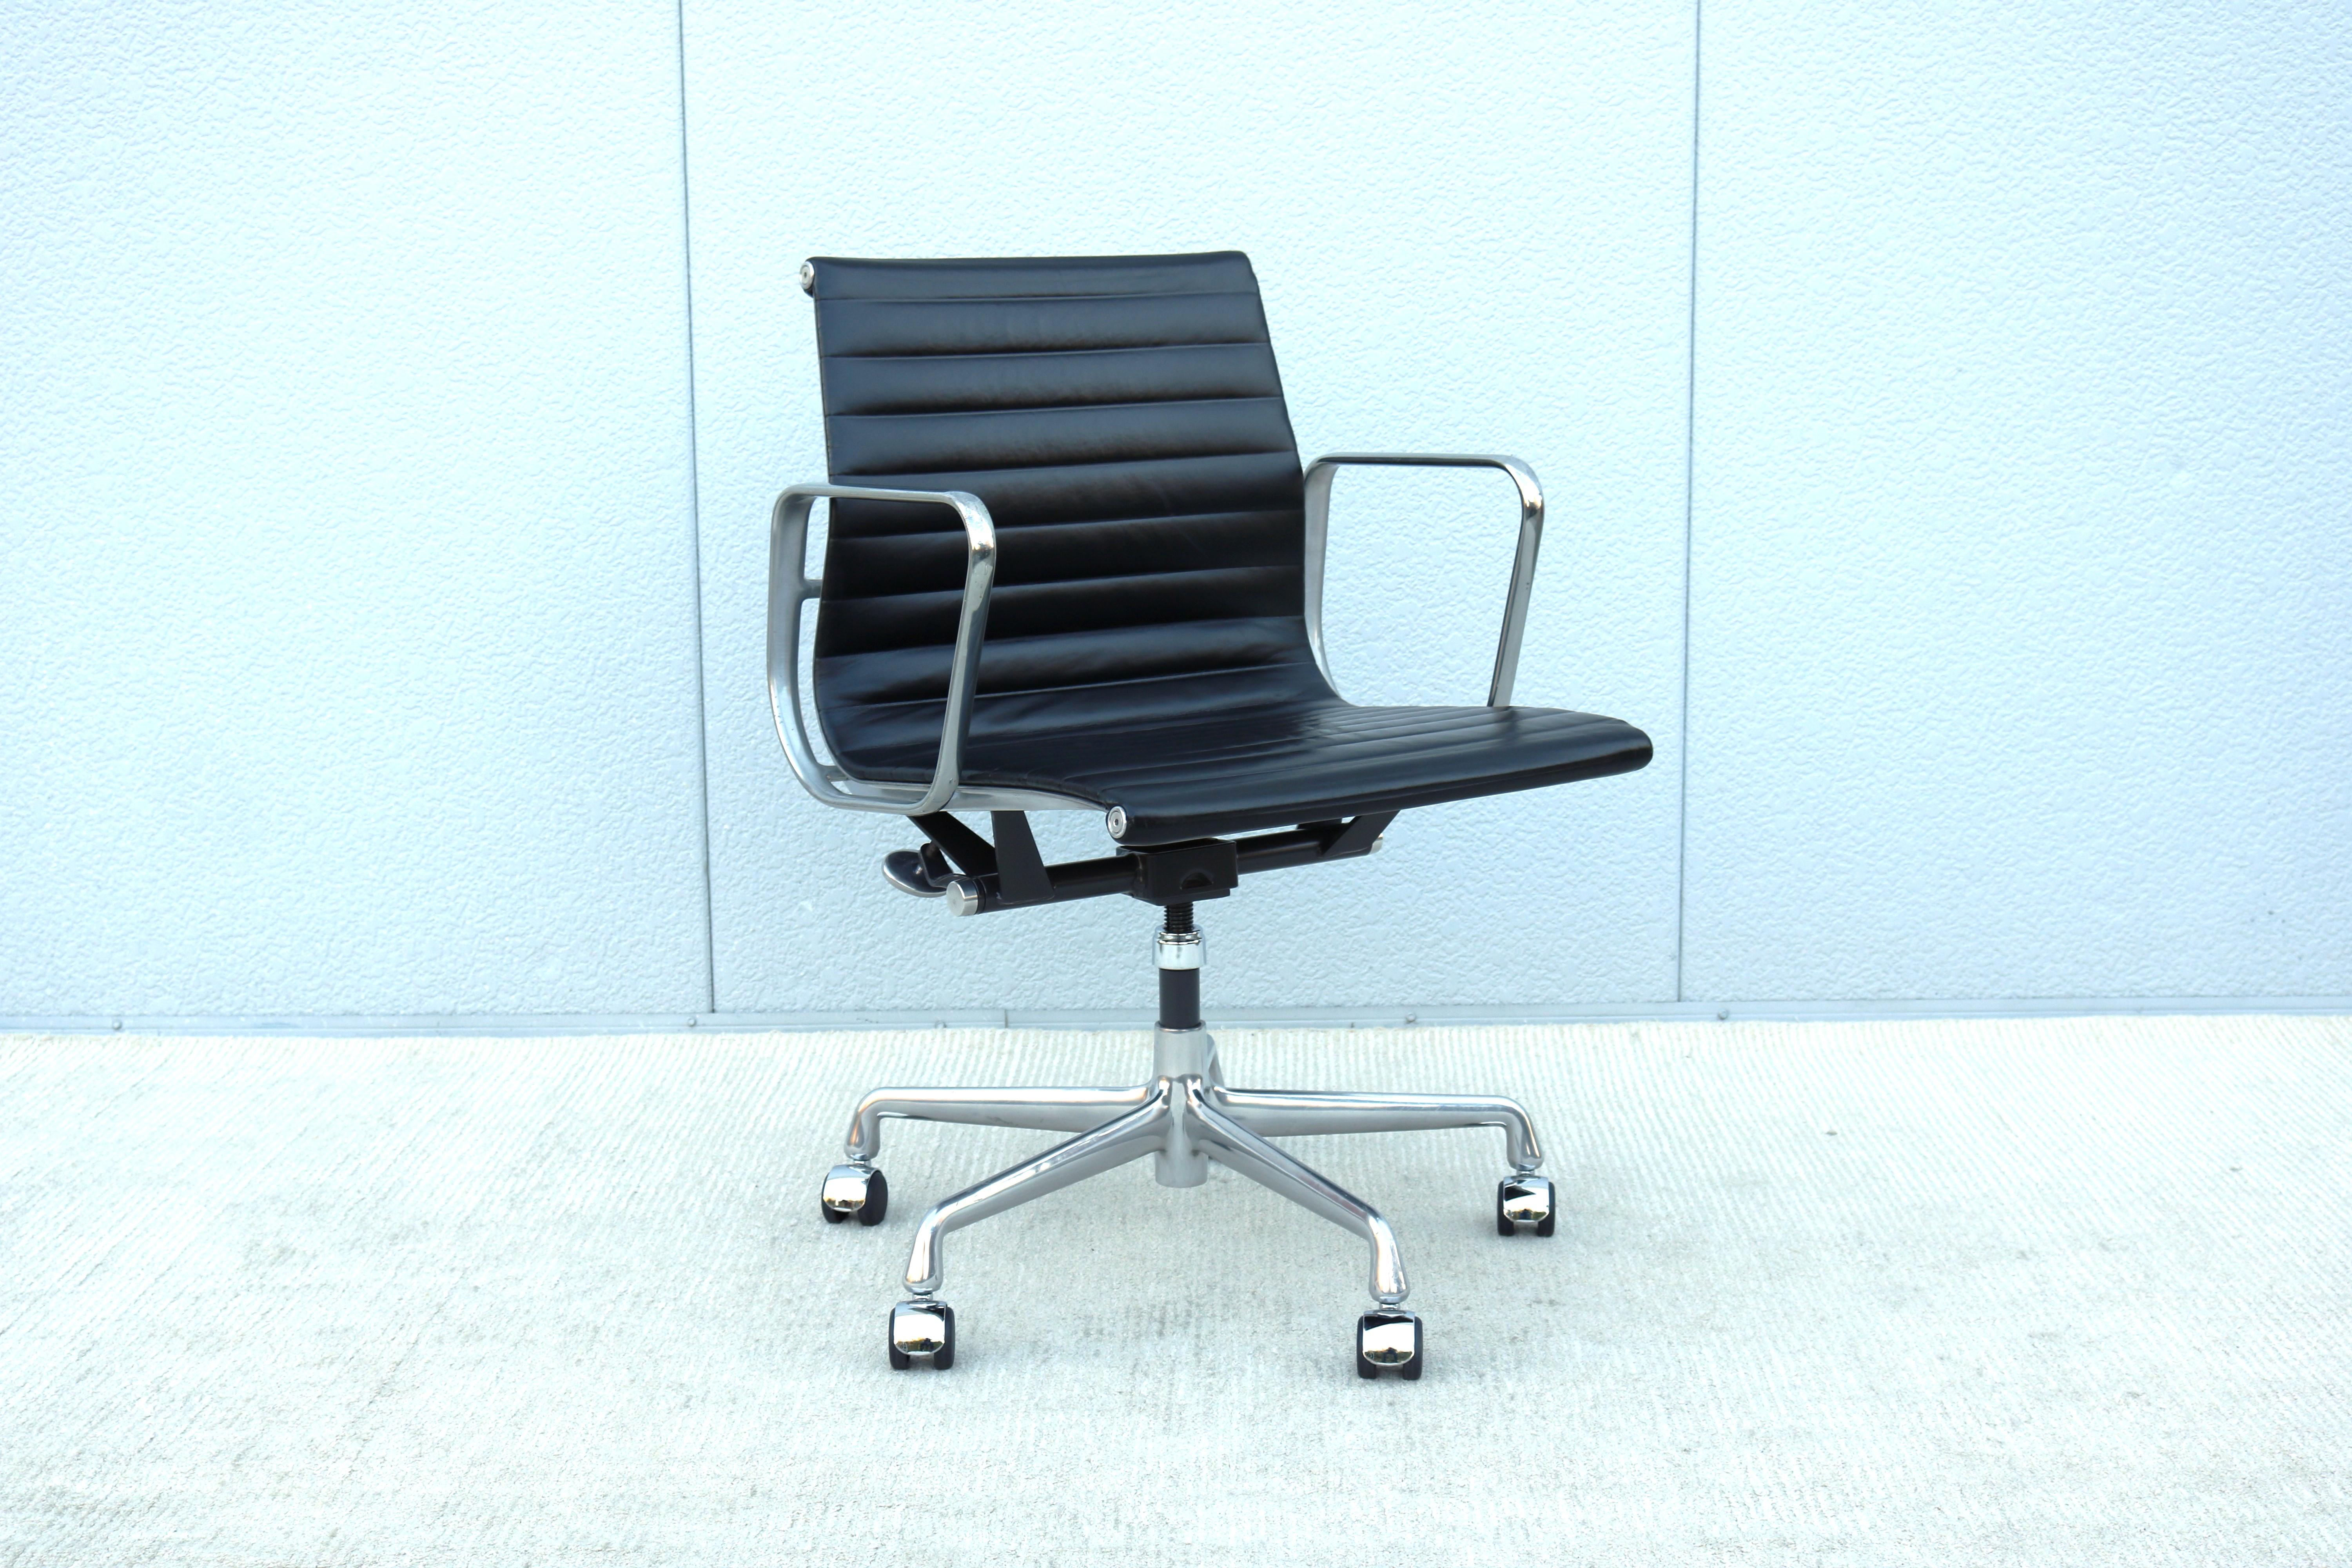 Stunning authentic Mid-Century Modern Eames aluminum group management chair.
A timeless design classic and contemporary with Innovative comfort features.
One of Herman Miller most popular chairs was designed in 1958 by Charles and Ray Eames.
This